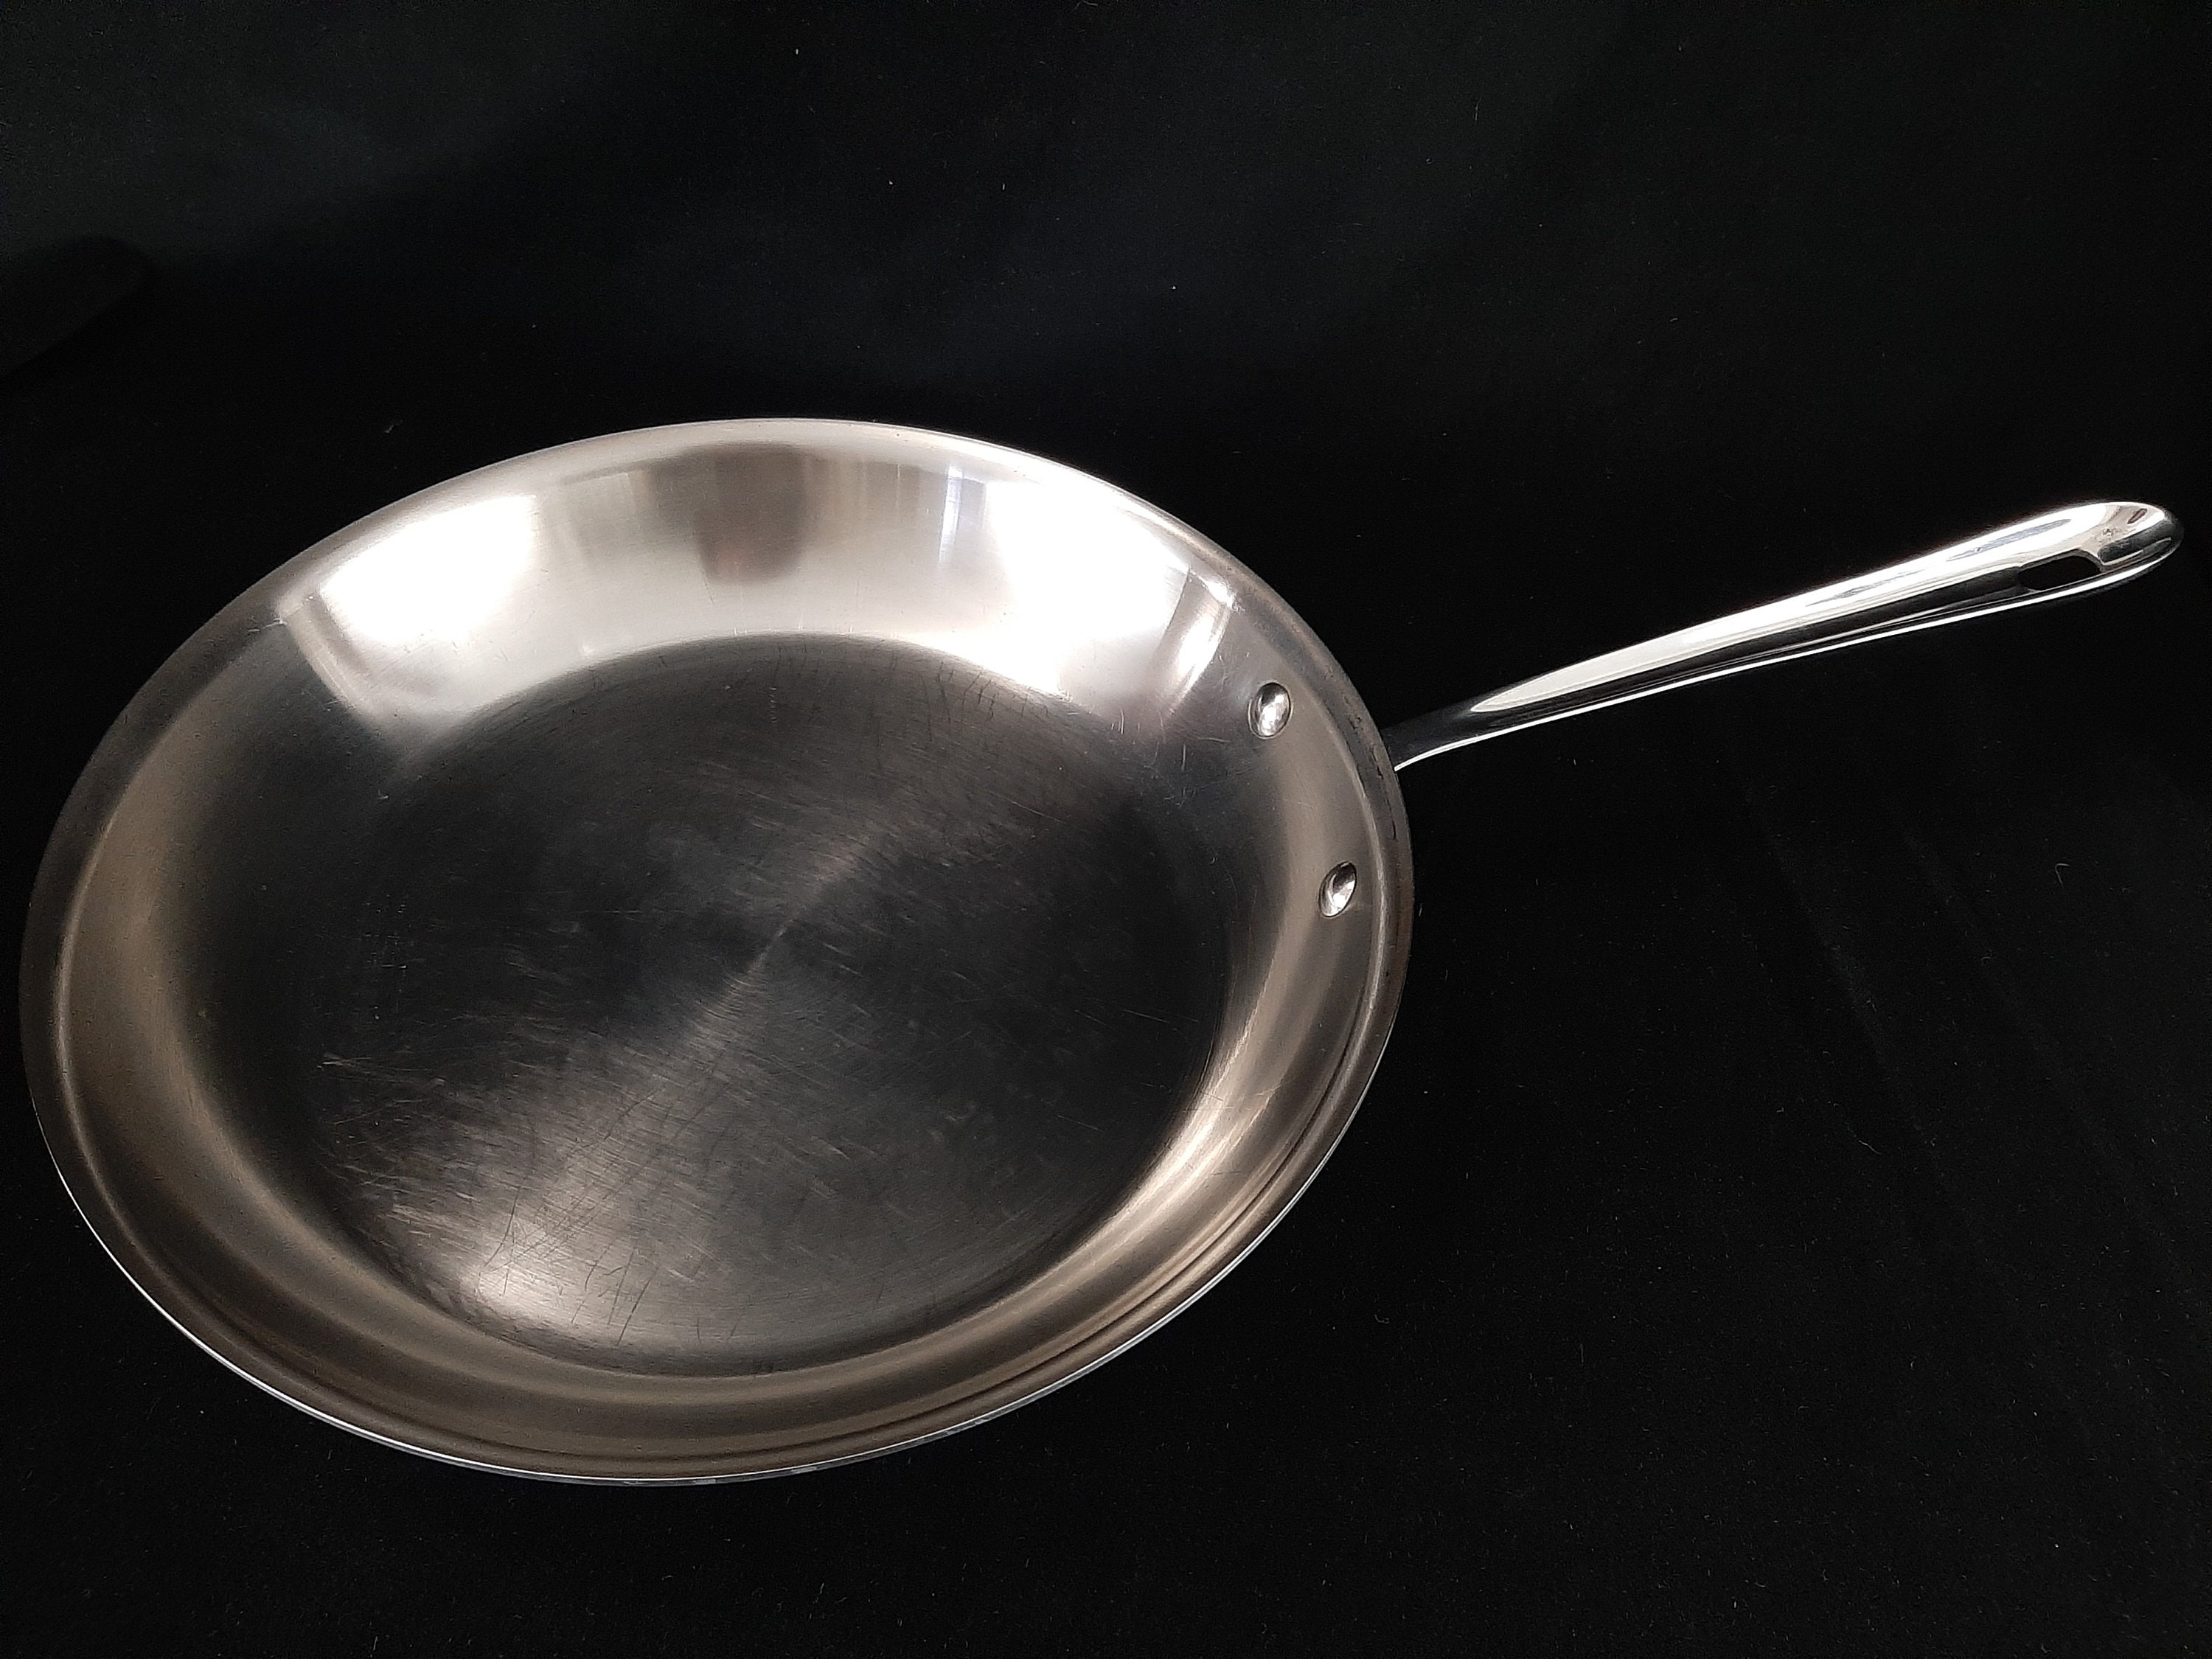 All-clad D3 Tri-ply Stainless Steel 12-inch Fry Pan Skillet Sauté